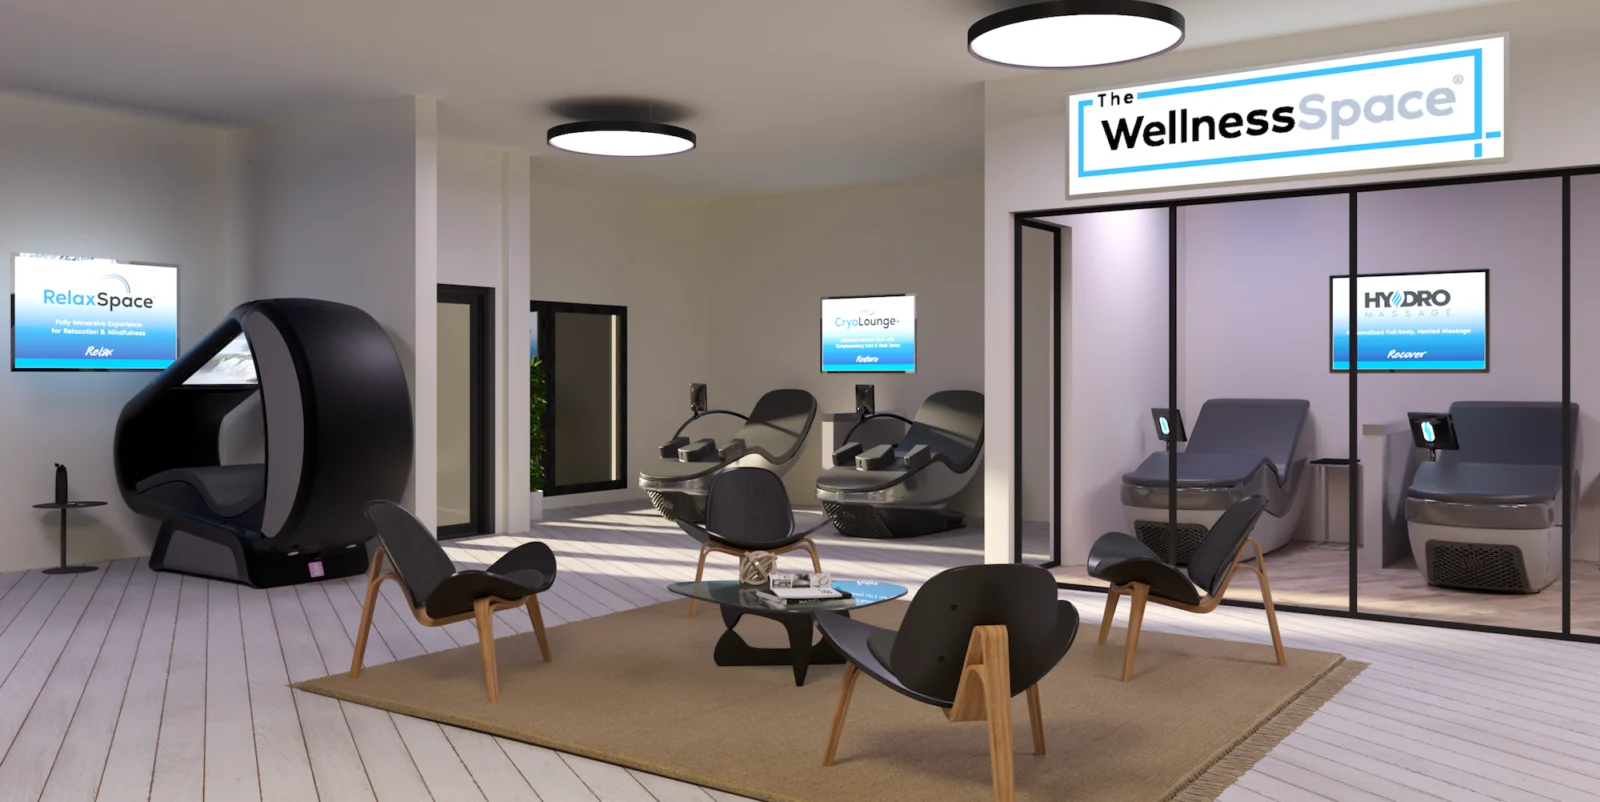 How Gyms Can Build Winning Wellness & Recovery Spaces, With WellnessSpace Brands